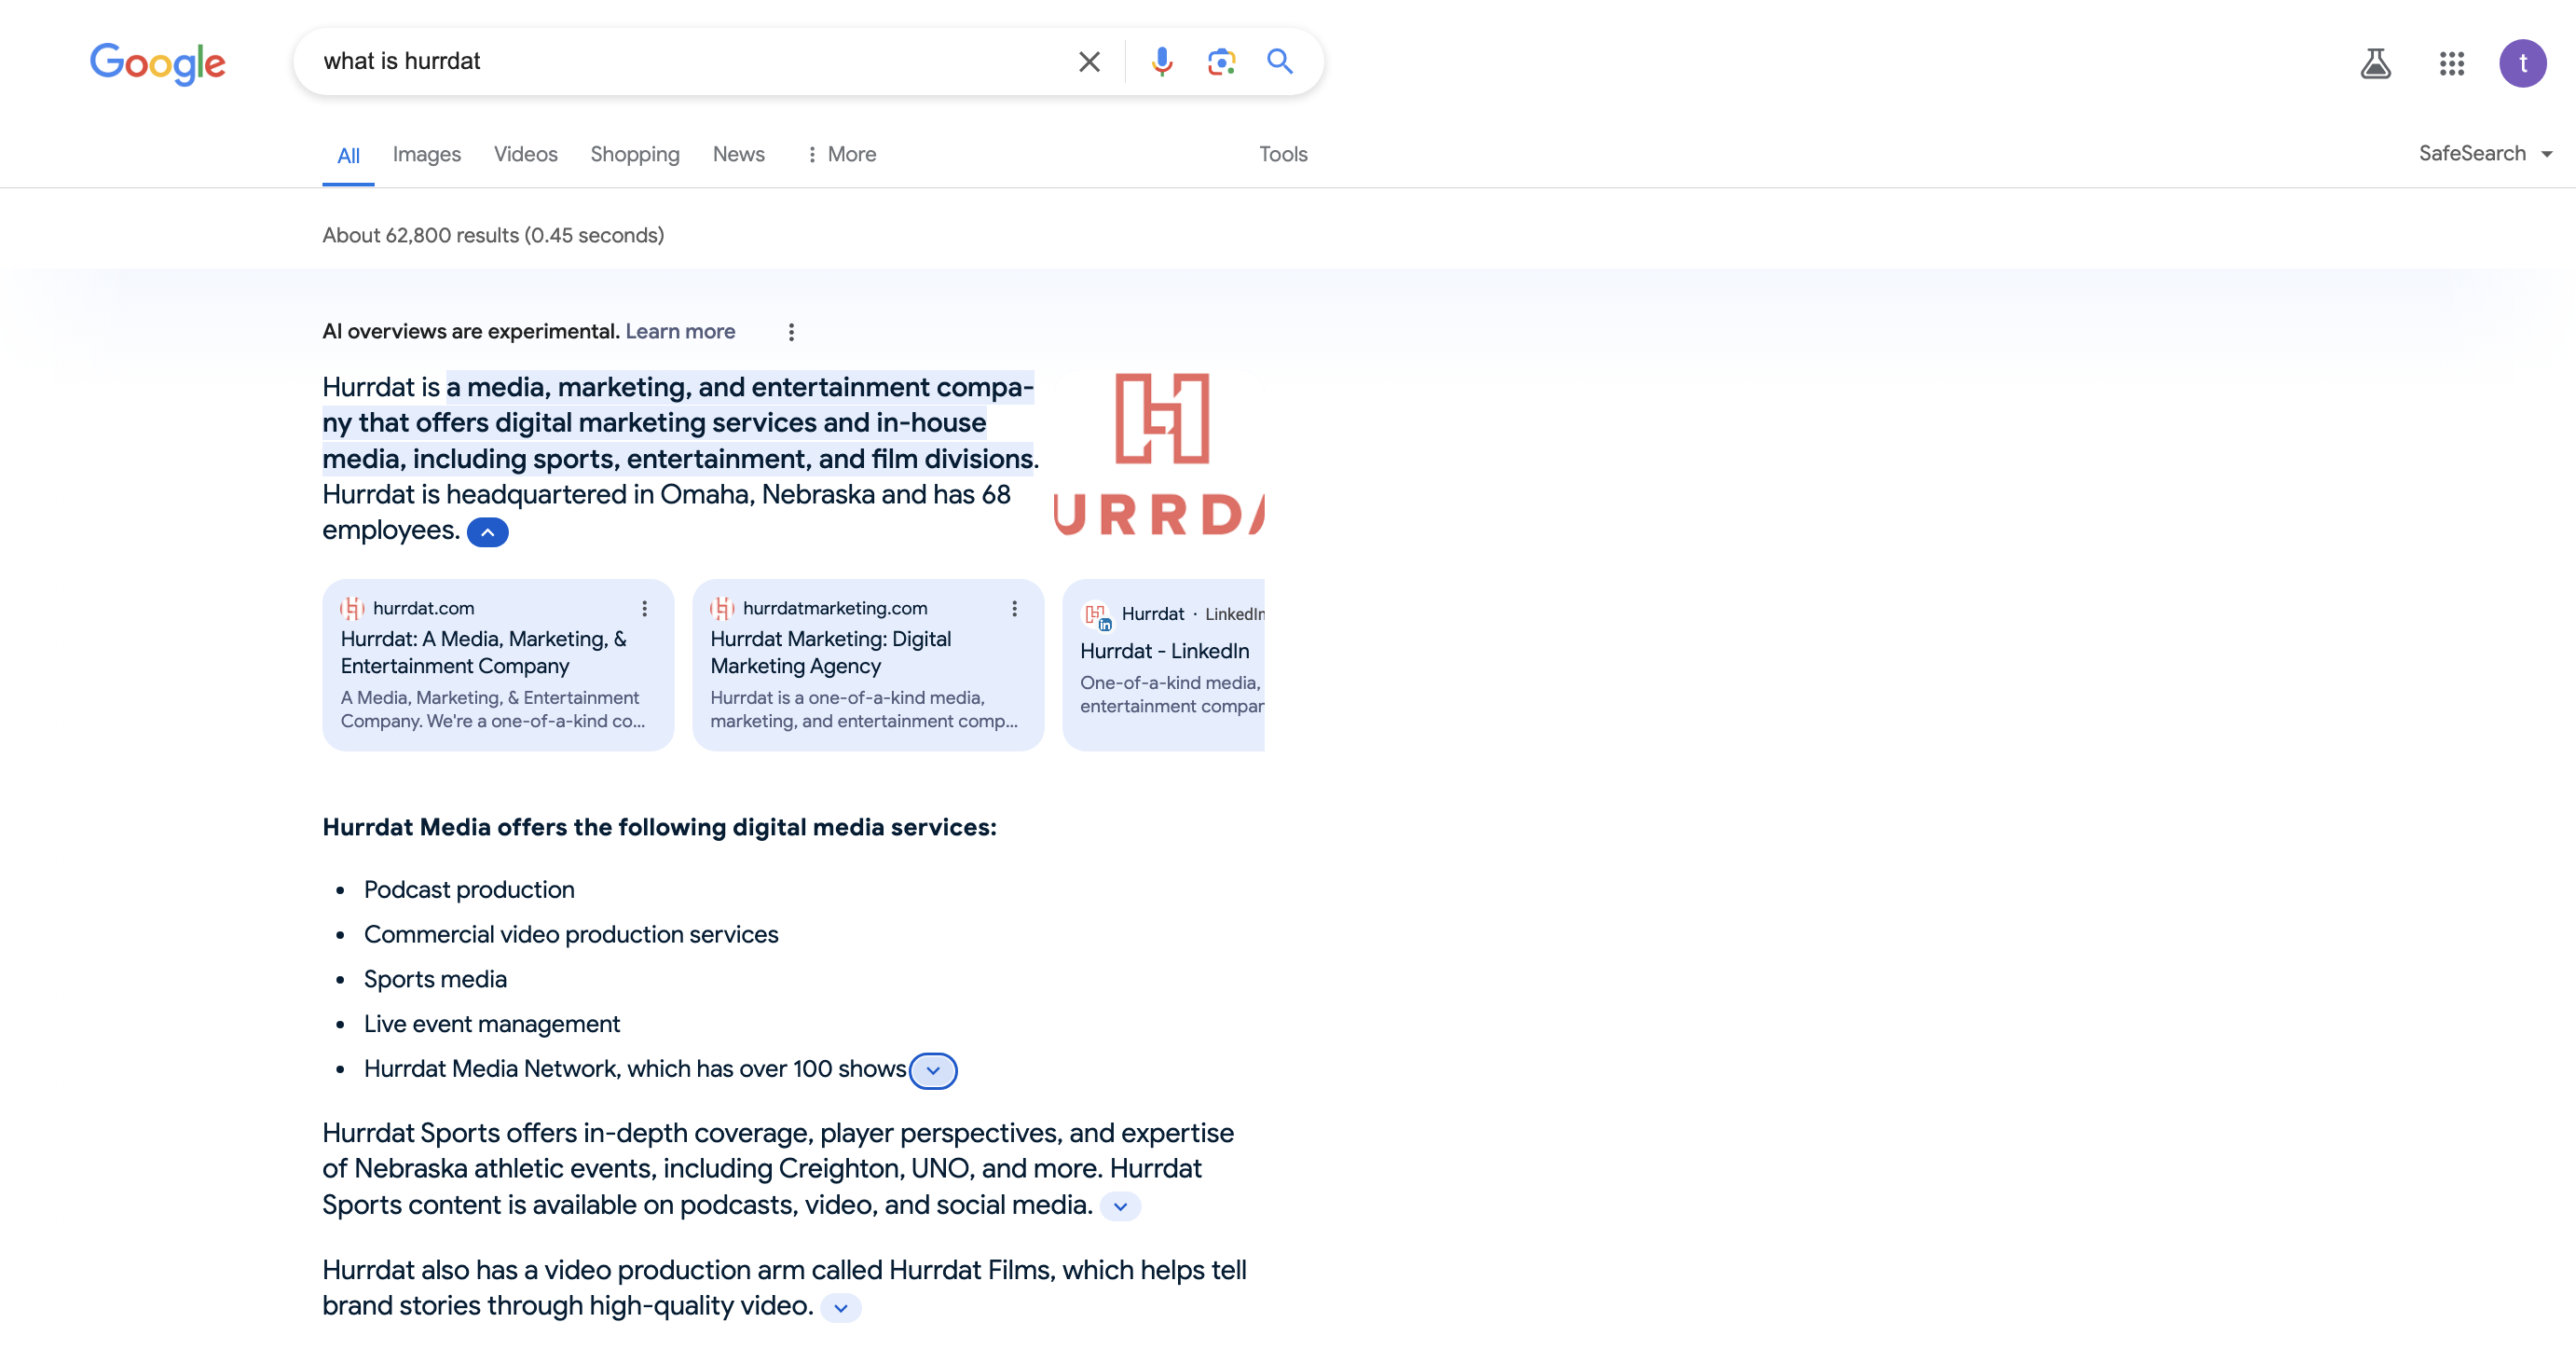 Screenshot of Google SGE result from query "what is Hurrdat" with text answer, bulleted list of services, logo, and three links to Hurrdat webpages